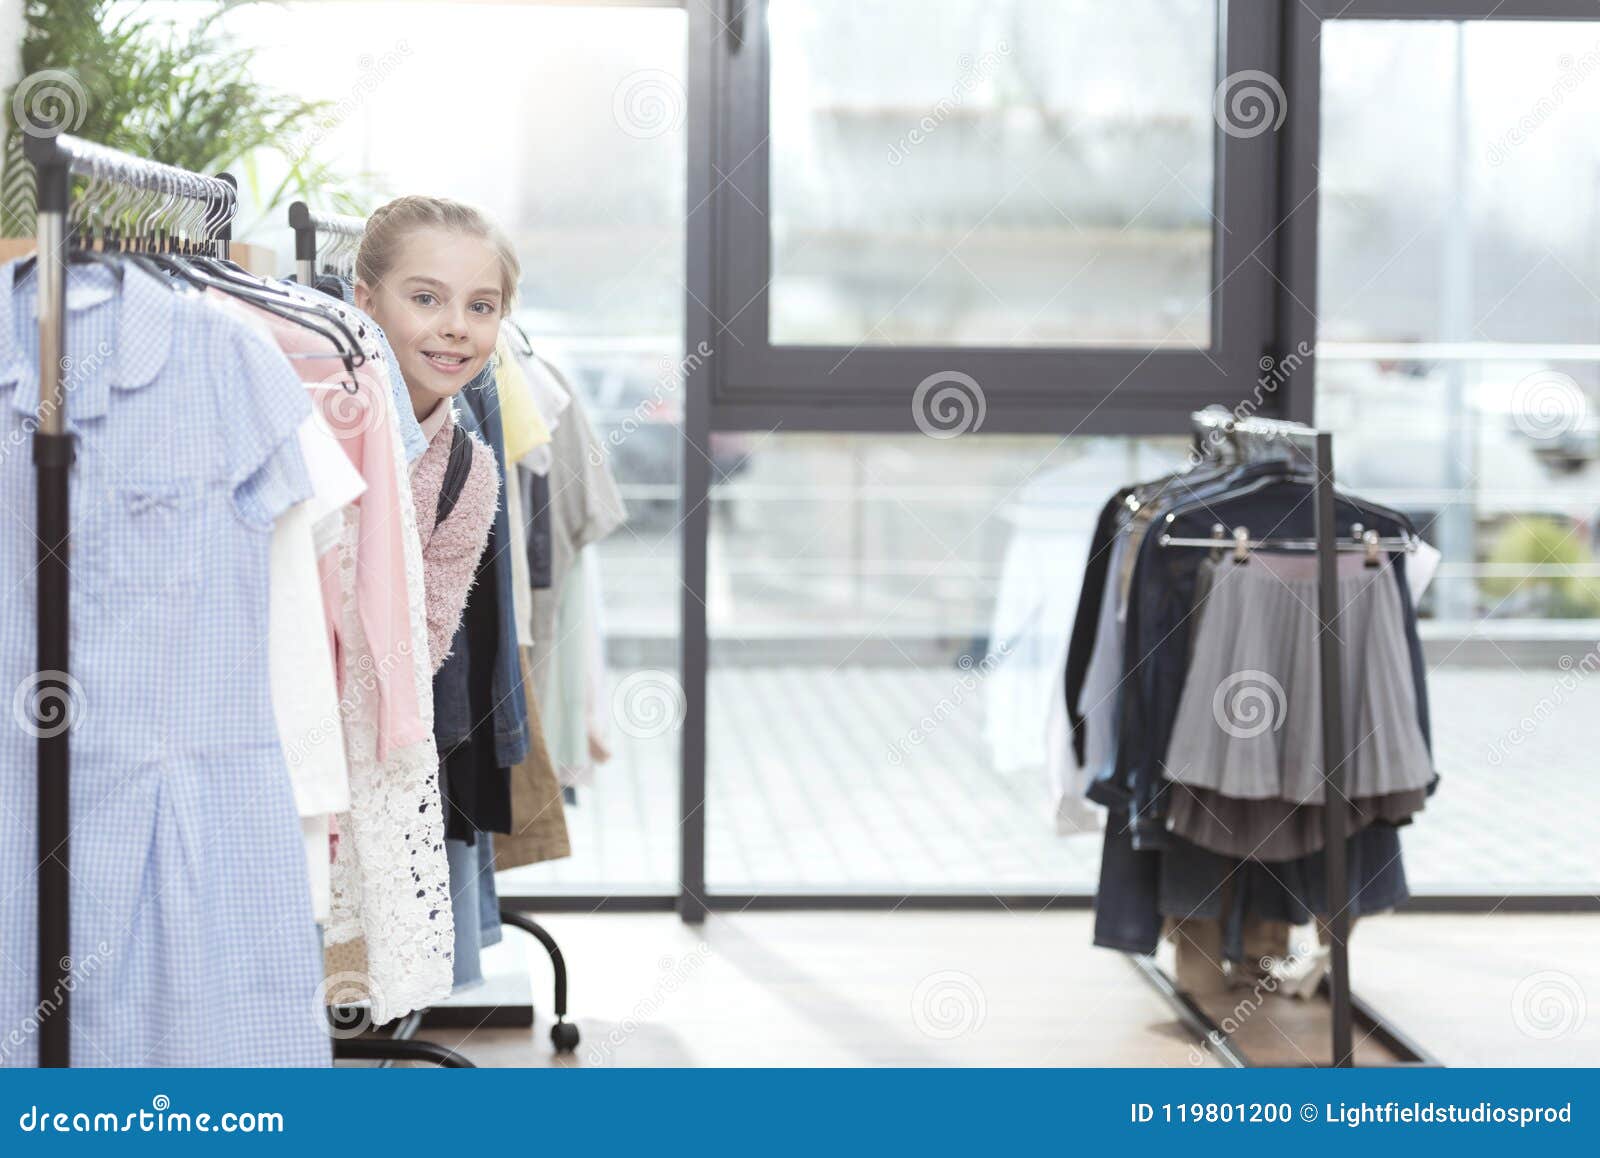 Smiling Kid Looking Out from Row of Clothes on Hanger Stock Photo ...